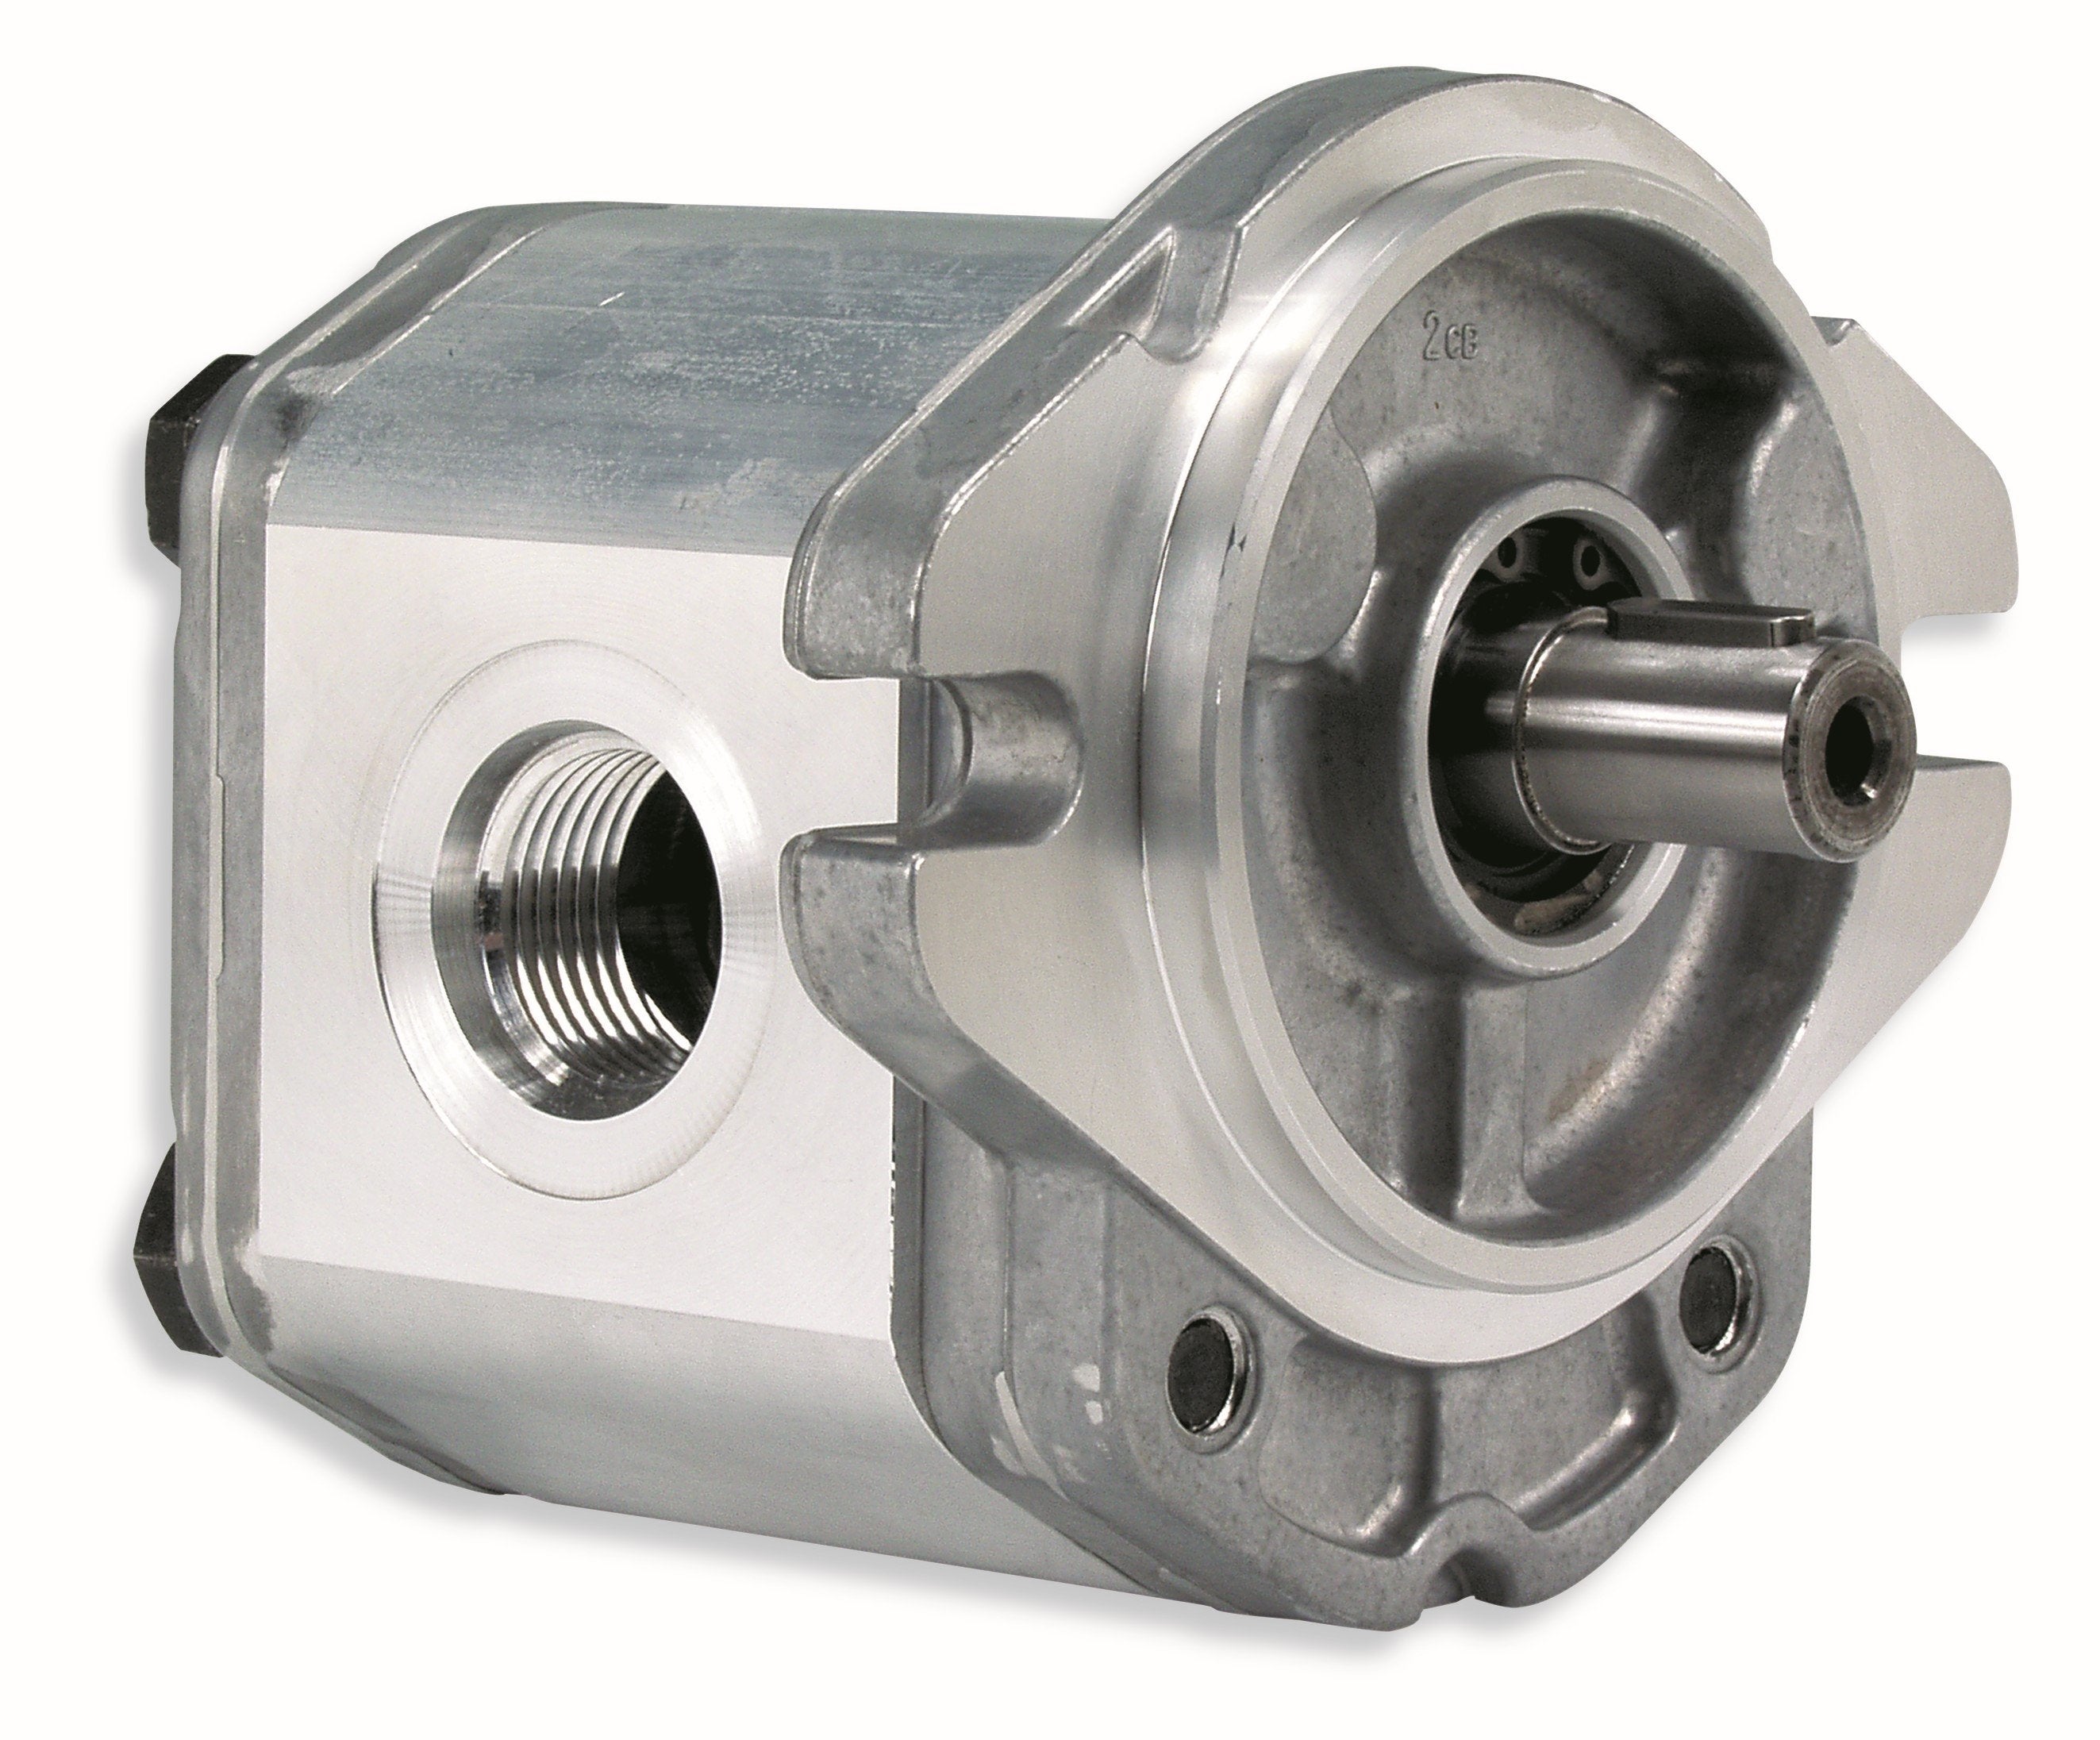 GHM3A-R-60-S1-E4 : Marzocchi Gear Motor, Bidirectional, 39cc, 3770psi rated, 3000RPM, 1" Code 61 ports, 13T 16/32DP Splined Shaft